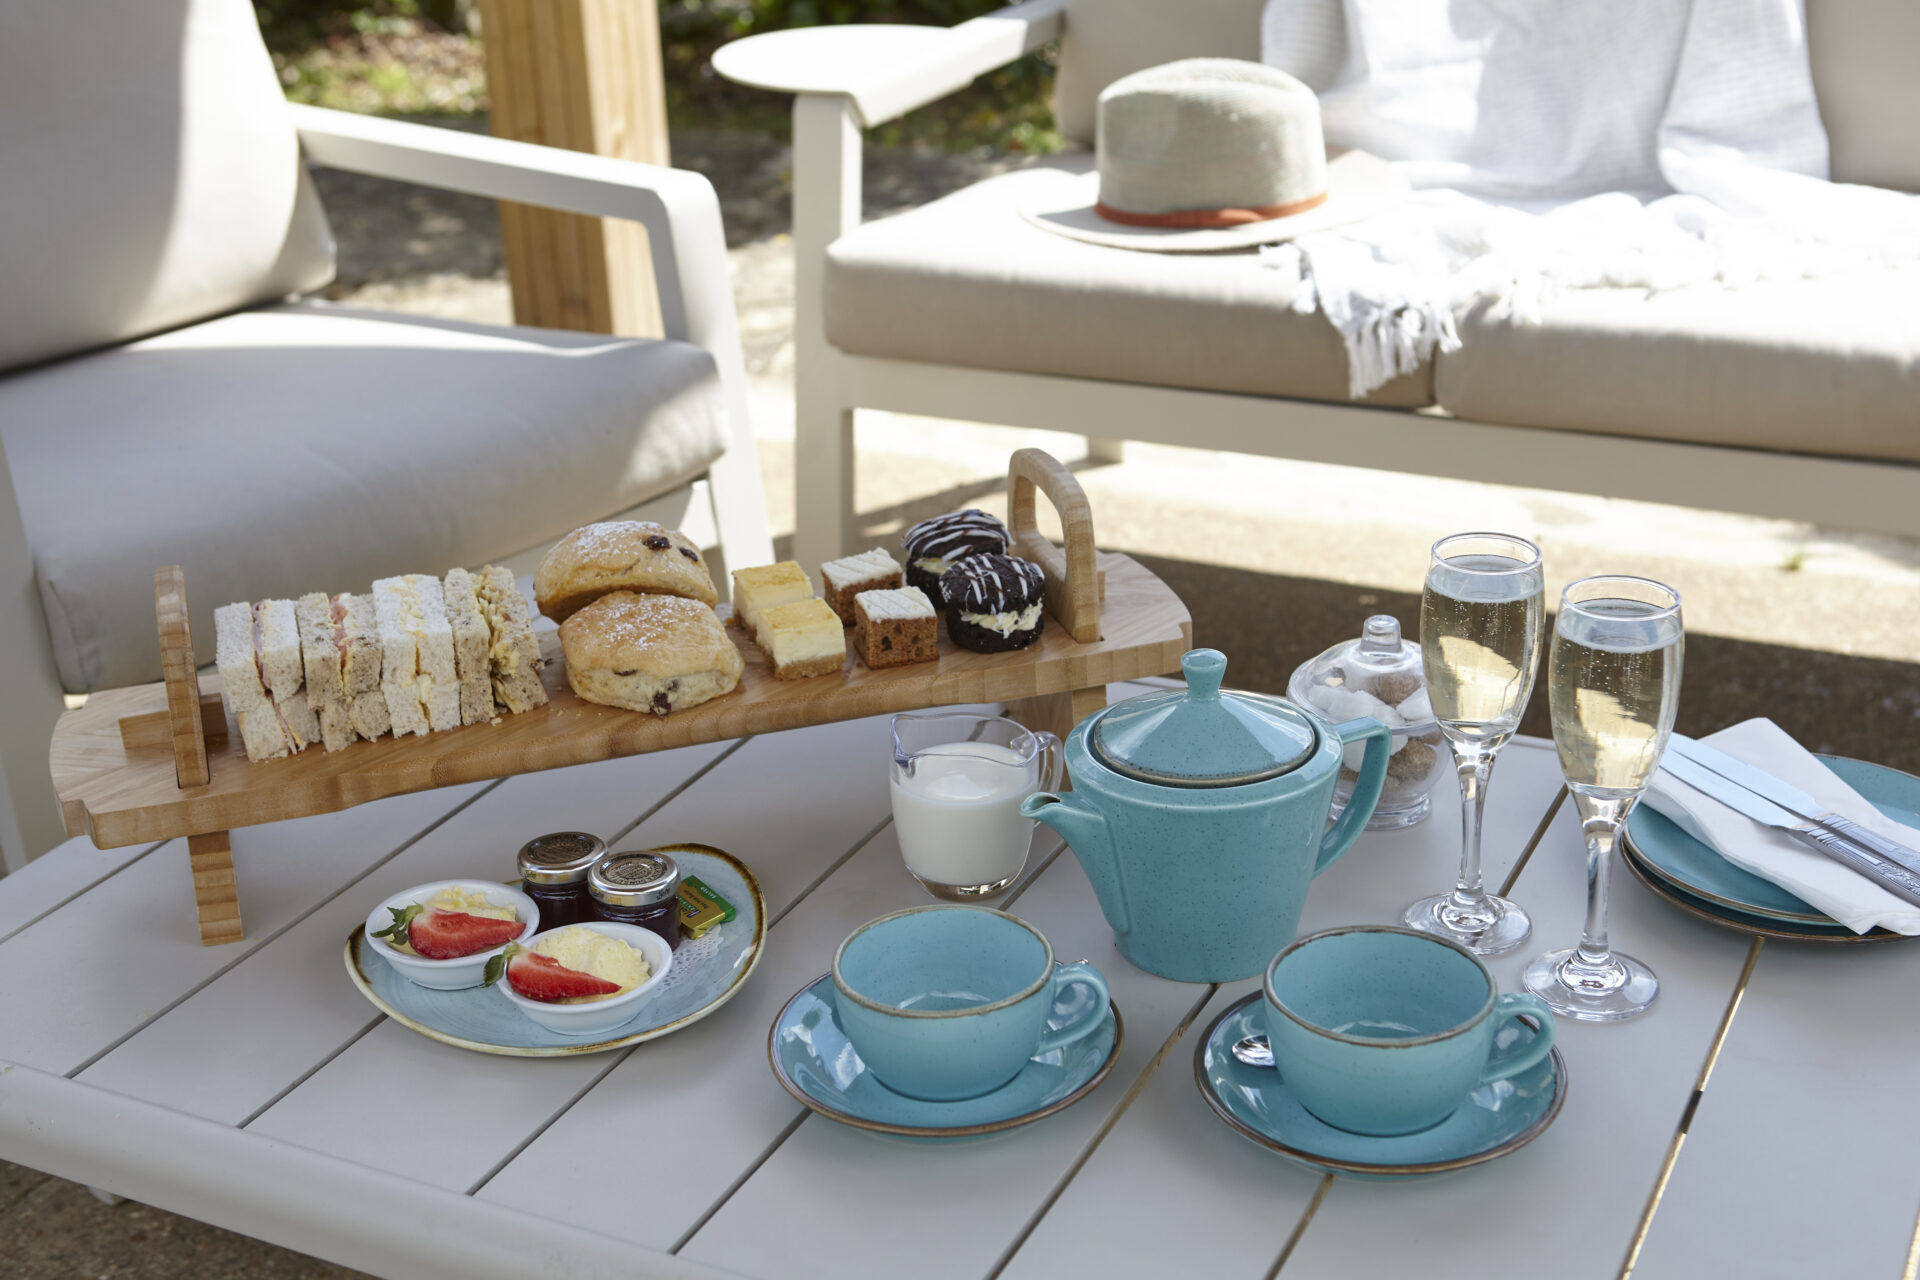 Luccombe Hall Hotel Afternoon Tea in the Garden Pergola, Shanklin, Isle of Wight